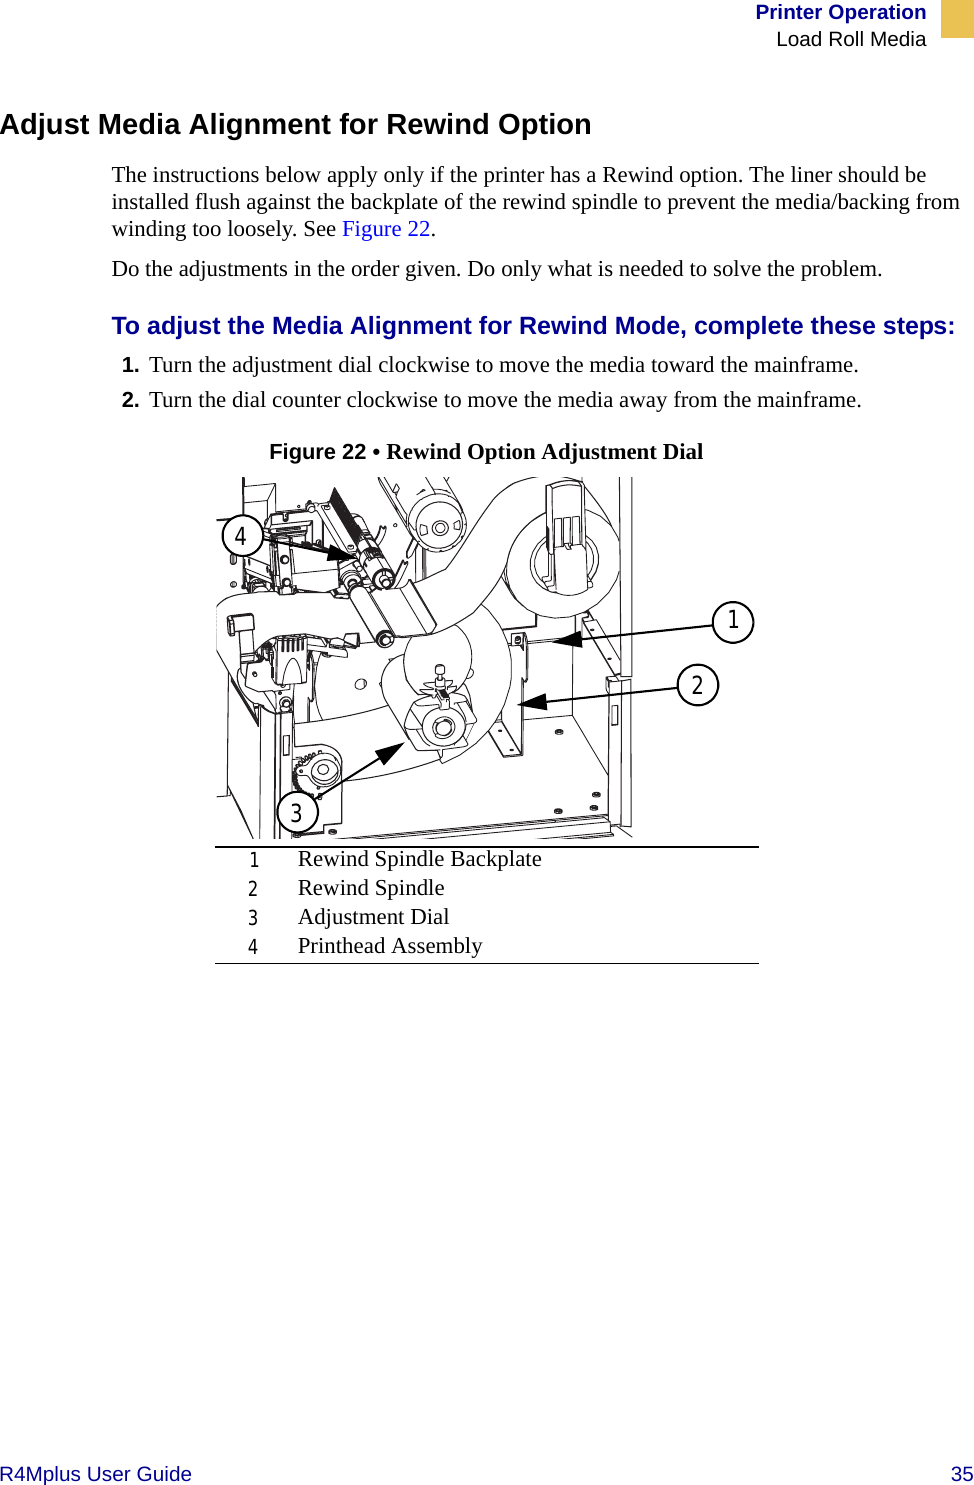 Printer OperationLoad Roll MediaR4Mplus User Guide  35Adjust Media Alignment for Rewind OptionThe instructions below apply only if the printer has a Rewind option. The liner should be installed flush against the backplate of the rewind spindle to prevent the media/backing from winding too loosely. See Figure 22.Do the adjustments in the order given. Do only what is needed to solve the problem.To adjust the Media Alignment for Rewind Mode, complete these steps:1. Turn the adjustment dial clockwise to move the media toward the mainframe. 2. Turn the dial counter clockwise to move the media away from the mainframe.Figure 22 • Rewind Option Adjustment Dial1Rewind Spindle Backplate2Rewind Spindle3Adjustment Dial4Printhead Assembly1243